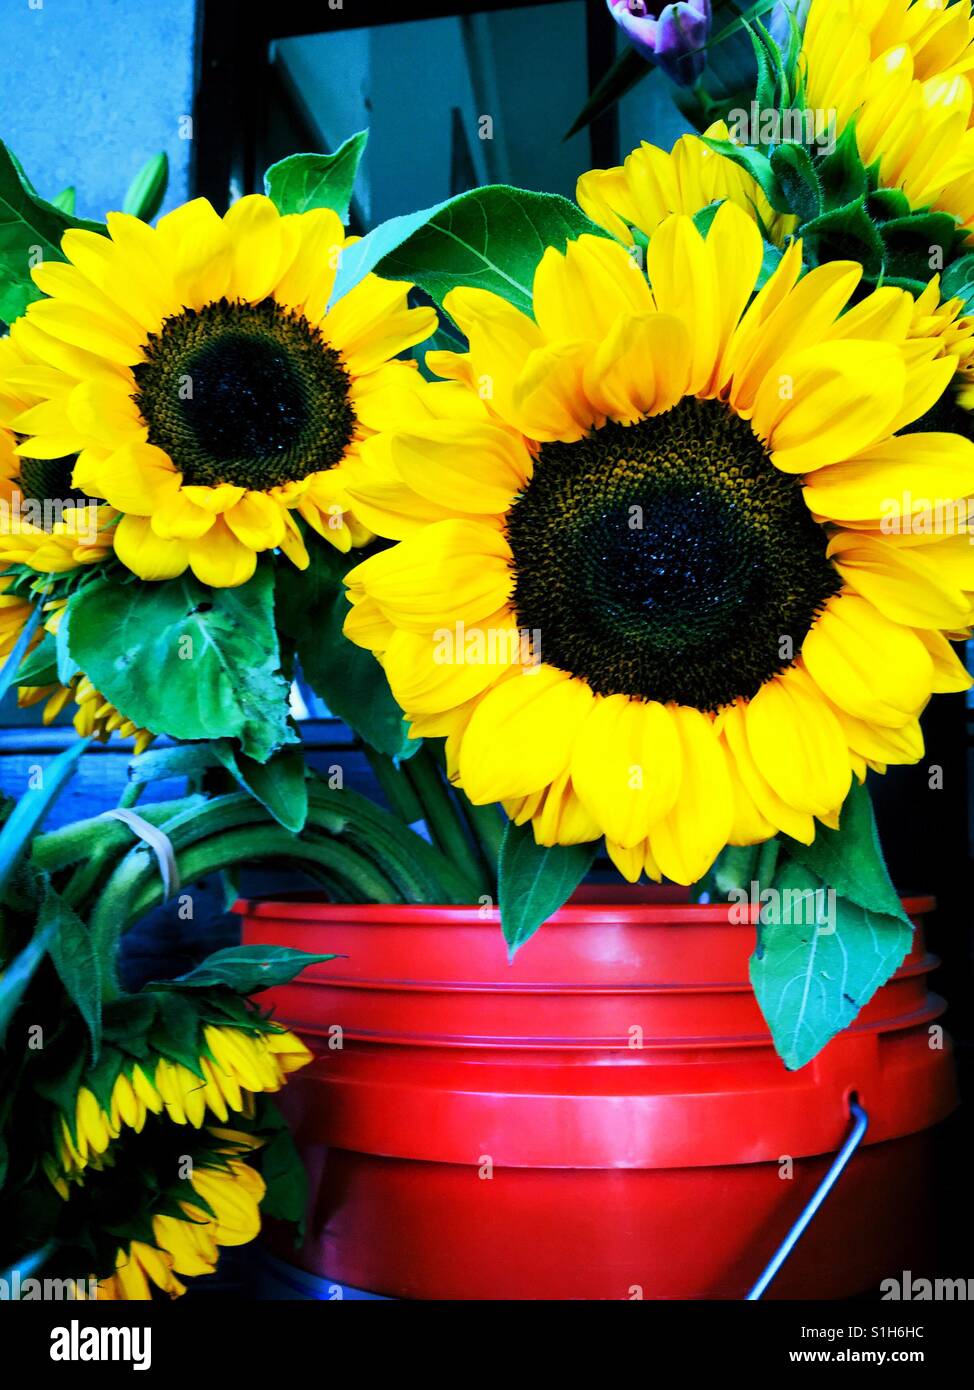 Five Careless Bright Golden Yellow Sunflowers in red and blue buckets, upright and floppy Stock Photo